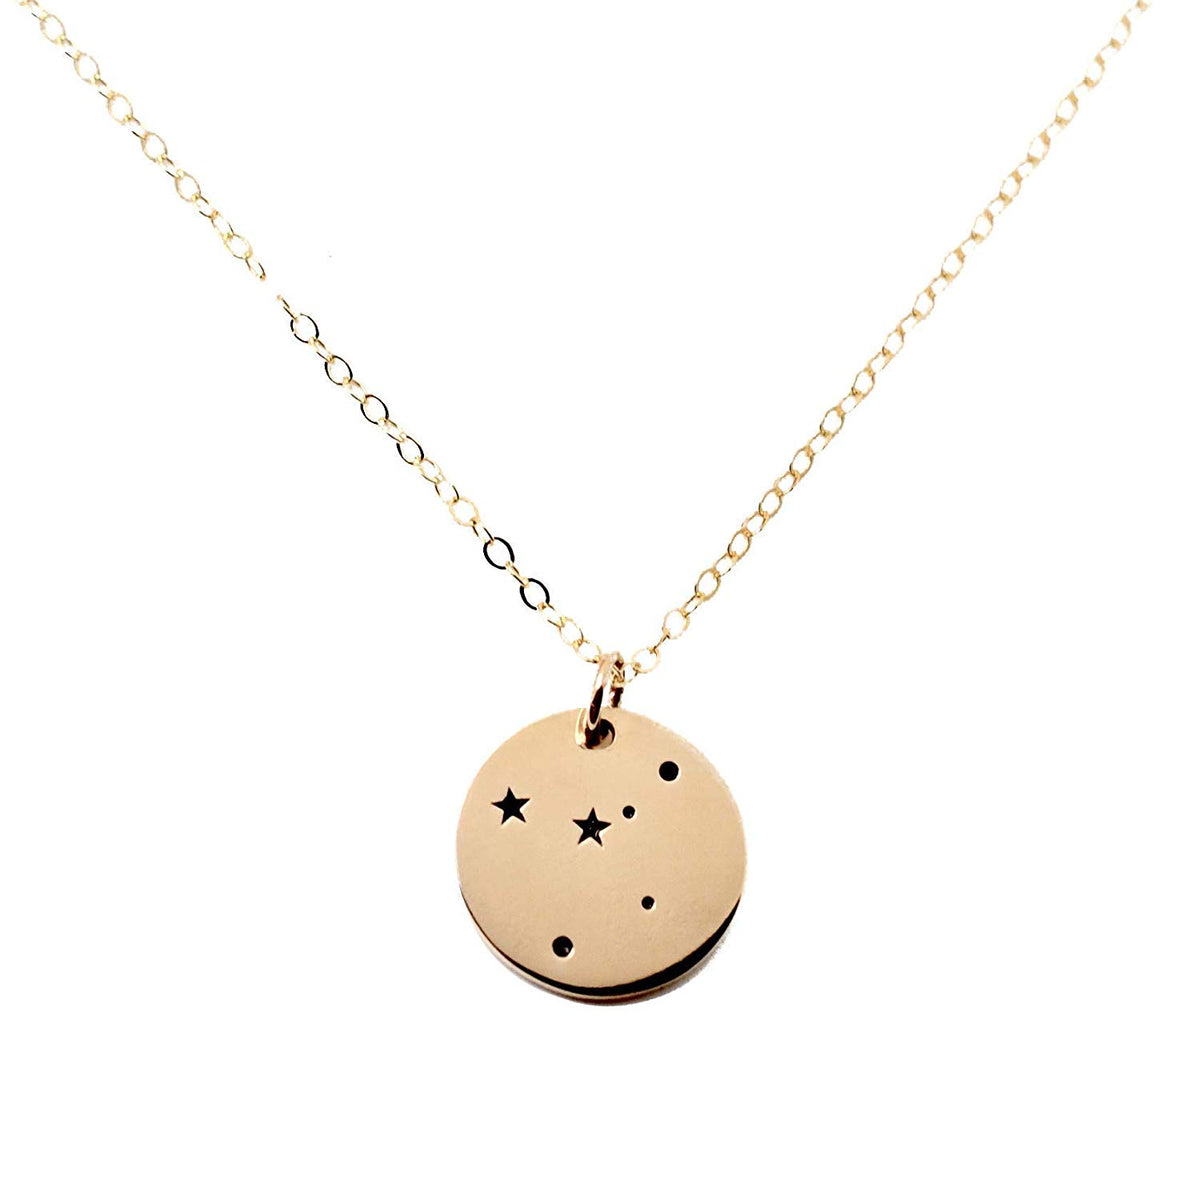 Cancer Zodiac Sign 14K Gold Filled Constellation Necklace - Love It Personalized